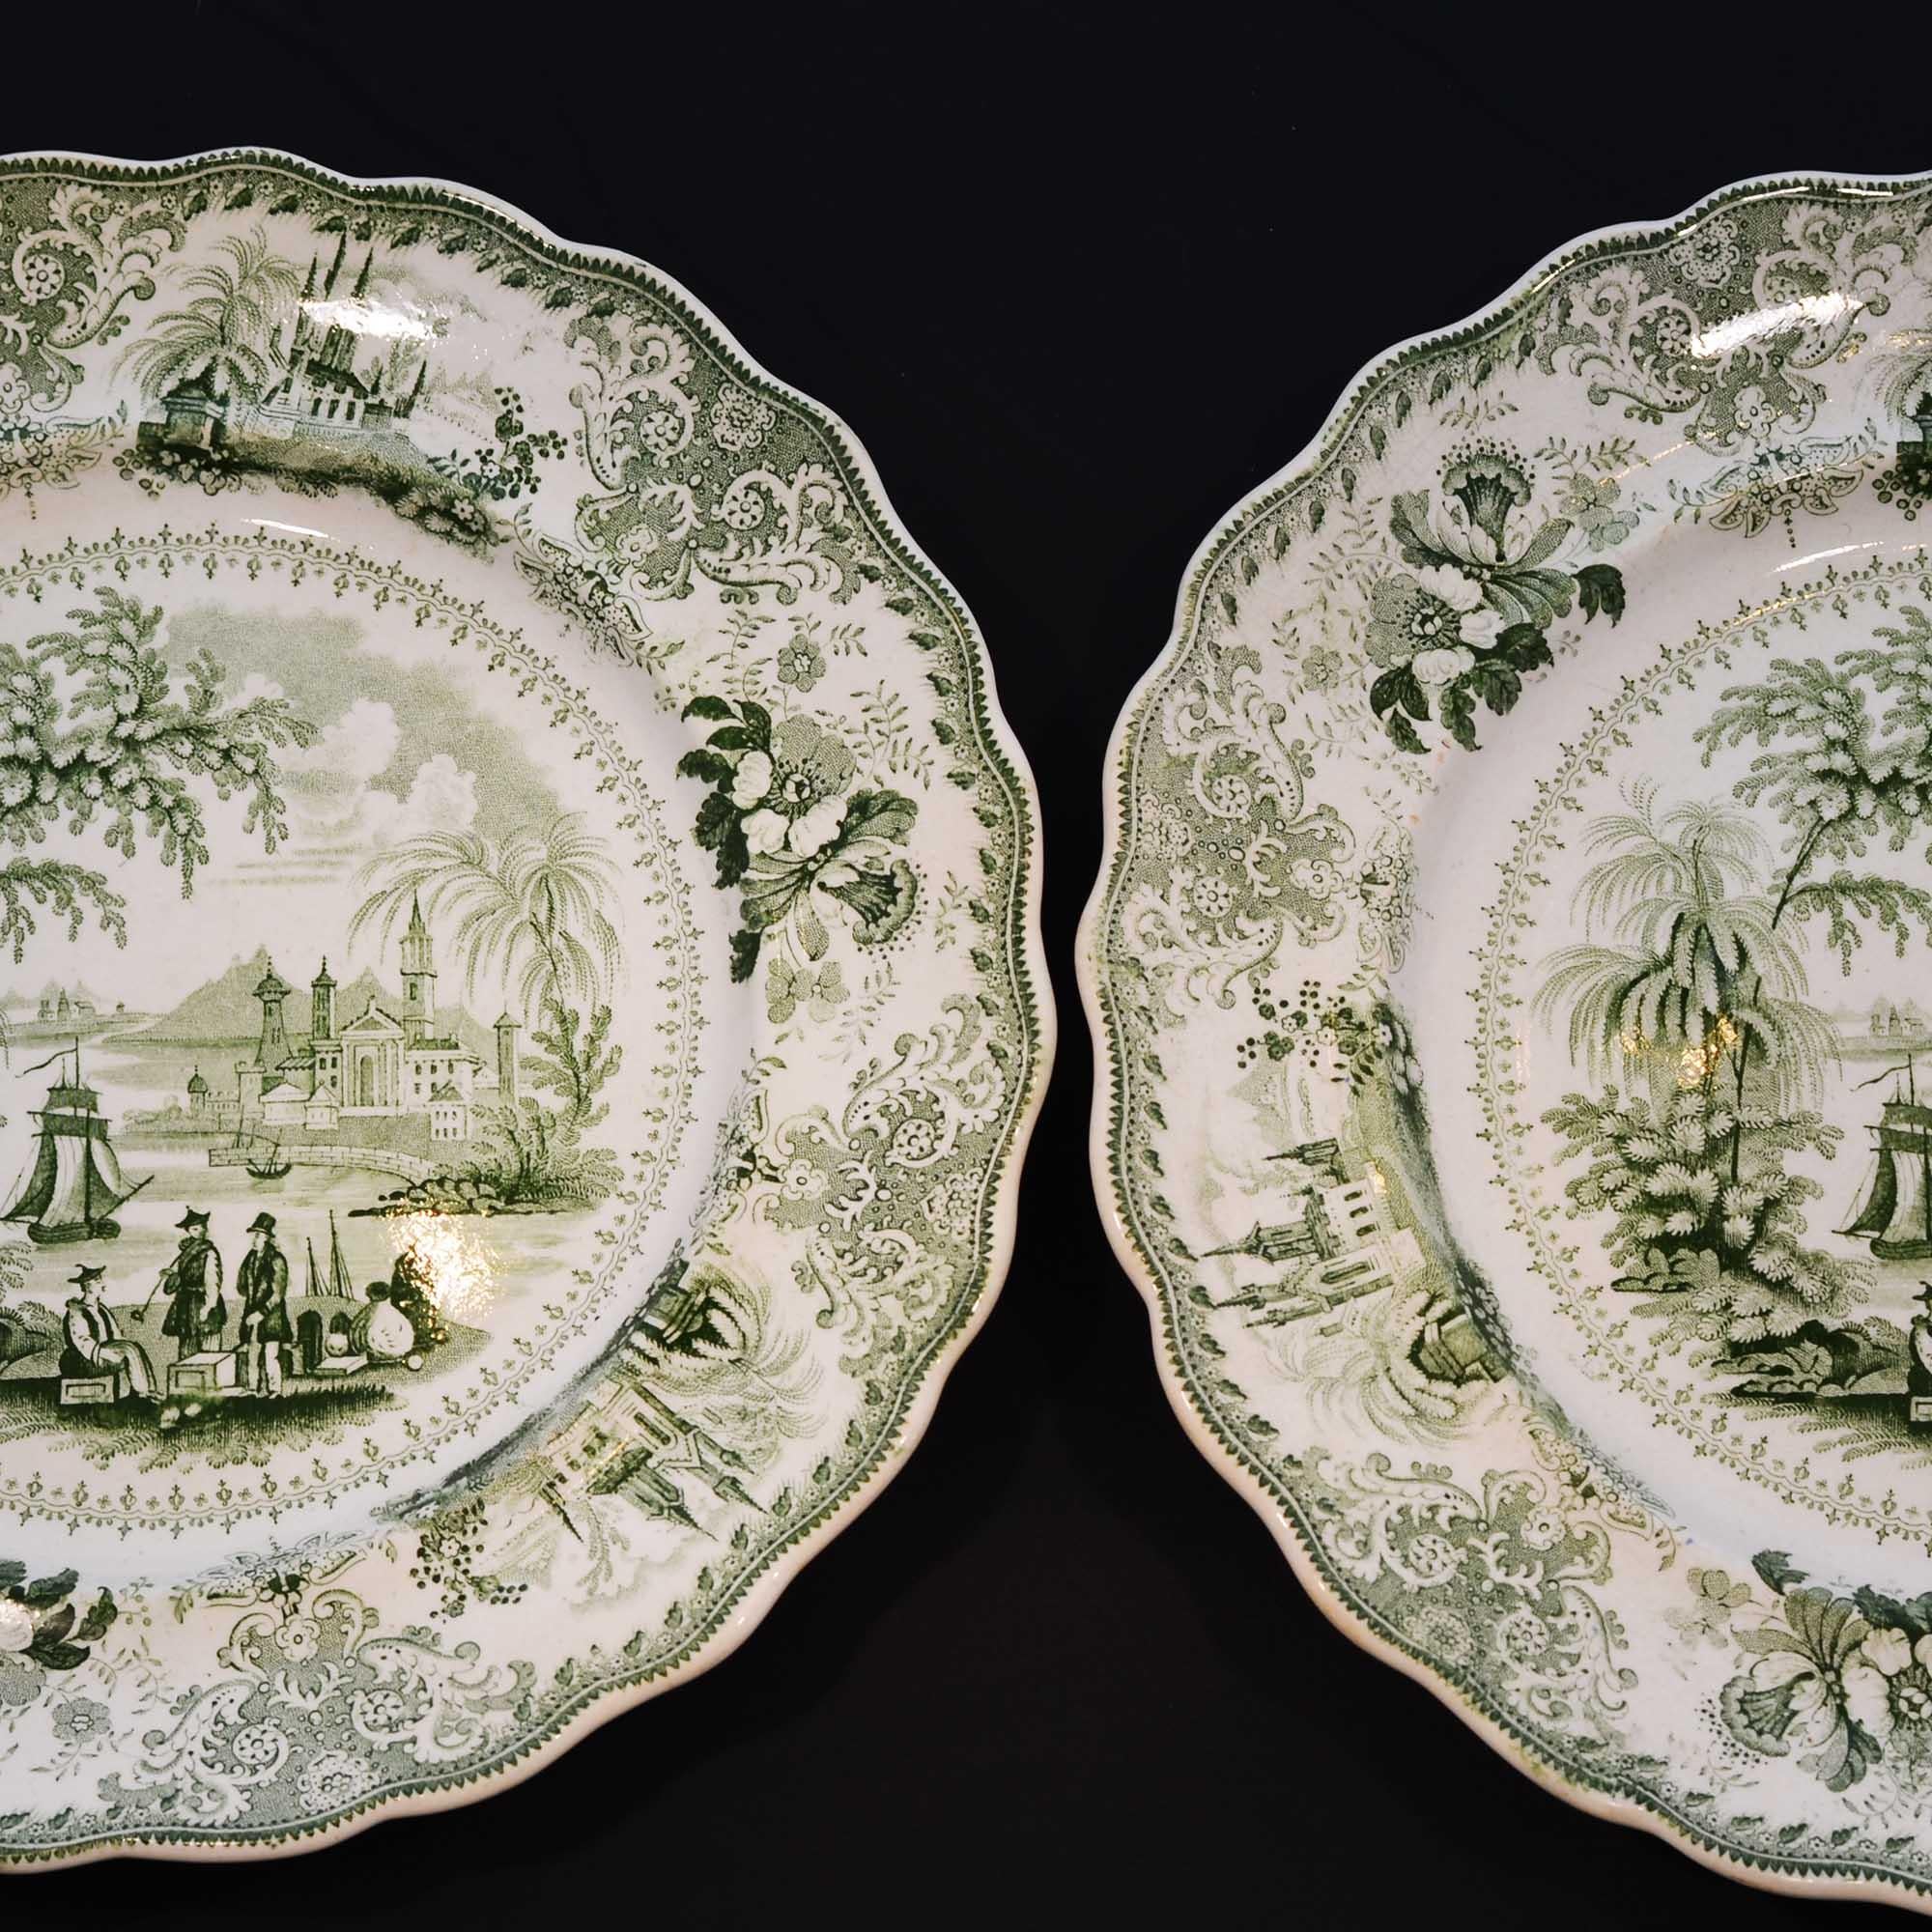 Lovely pair of green transferware plates. The scene is Commerce by Edward & George Phillips - northern Staffordshire pottery. The green is much more difficult to locate than the traditional blue pattern.